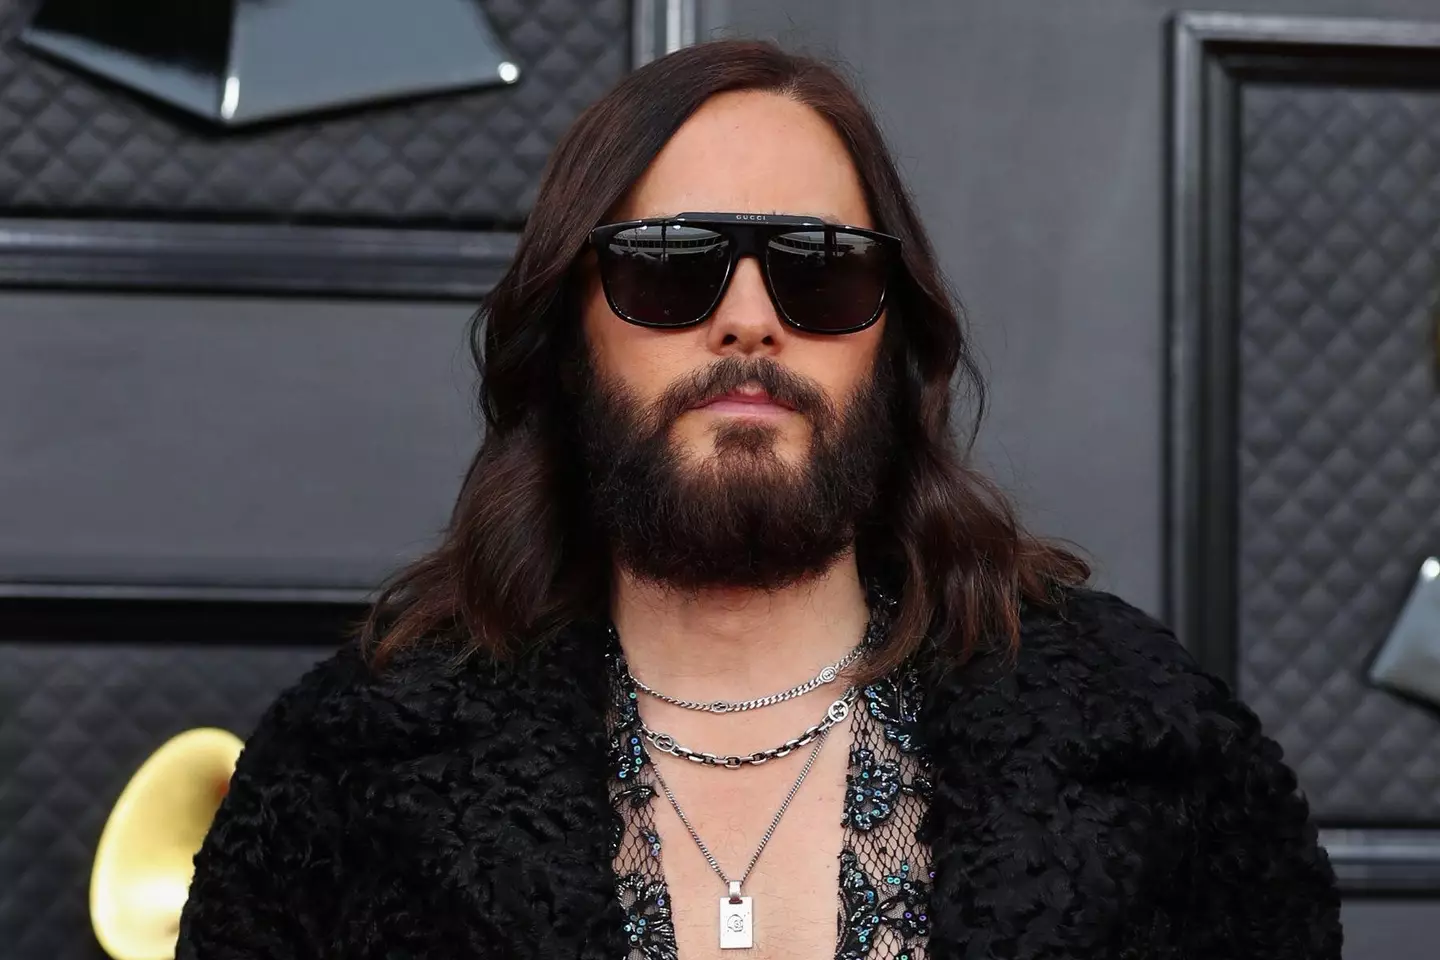 Fans were confused about Jared Leto at the Met Gala.